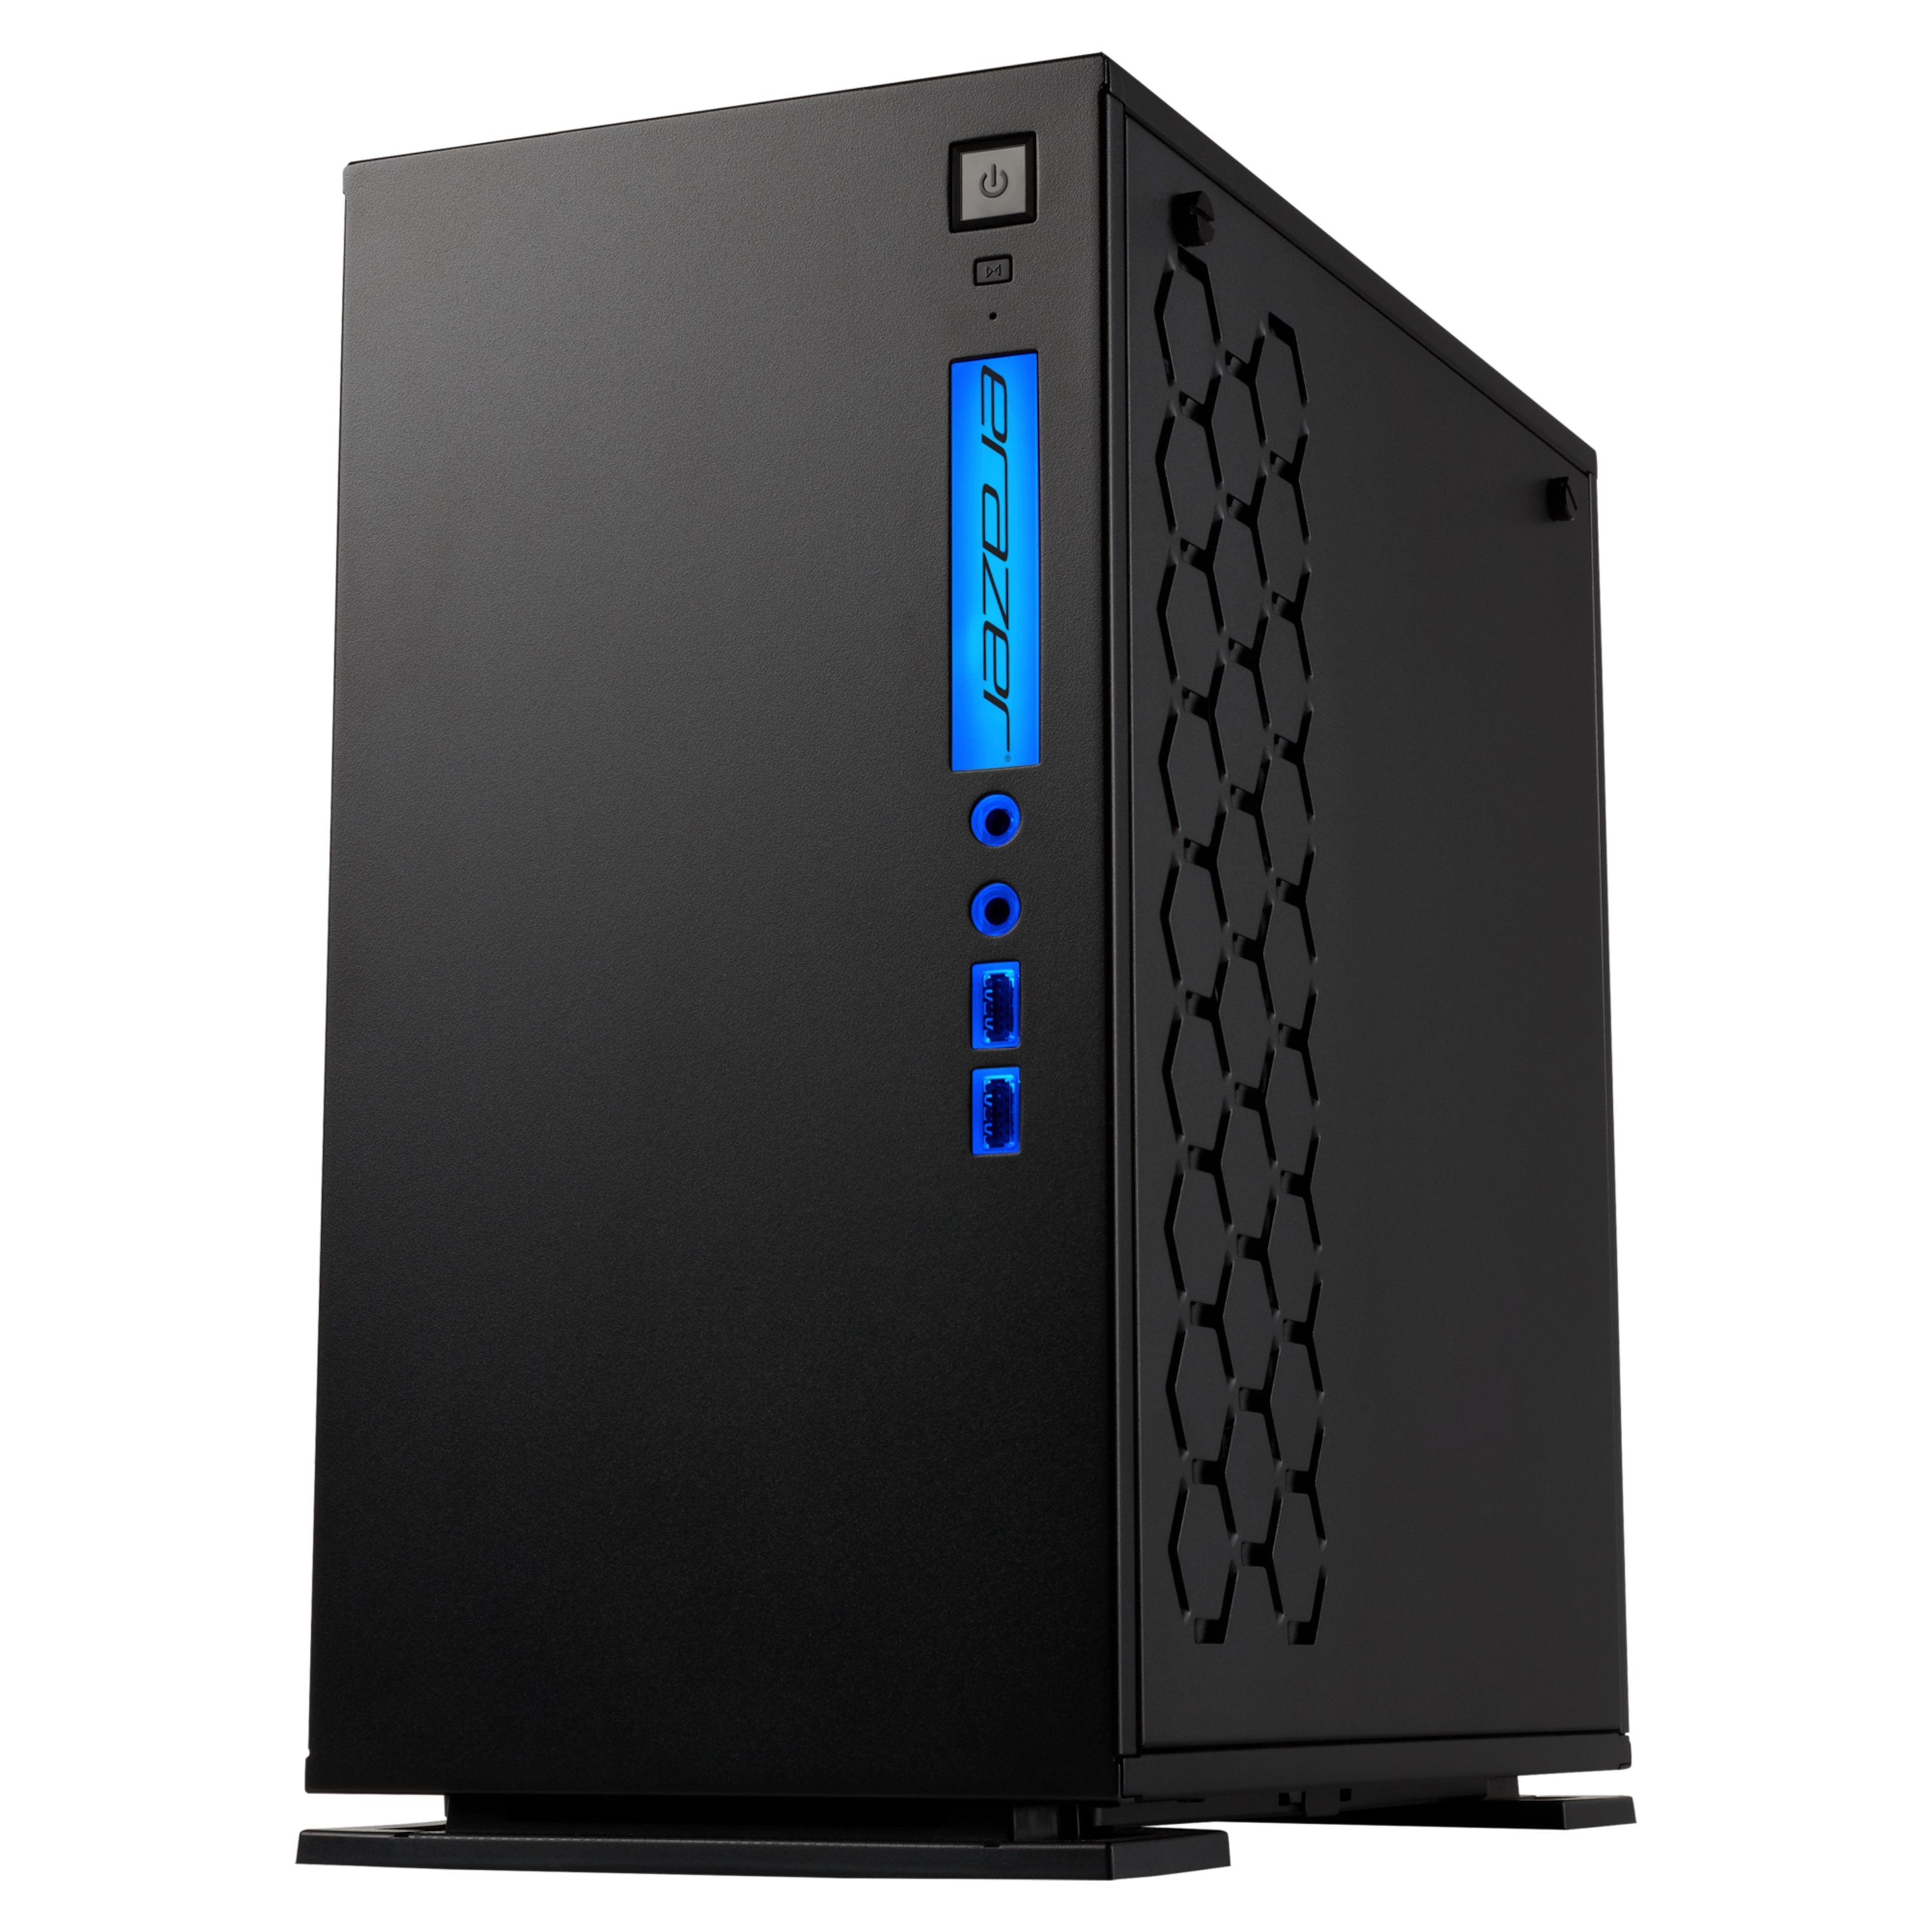 Medion Erazer X5361 G review: A powerful gaming PC for a